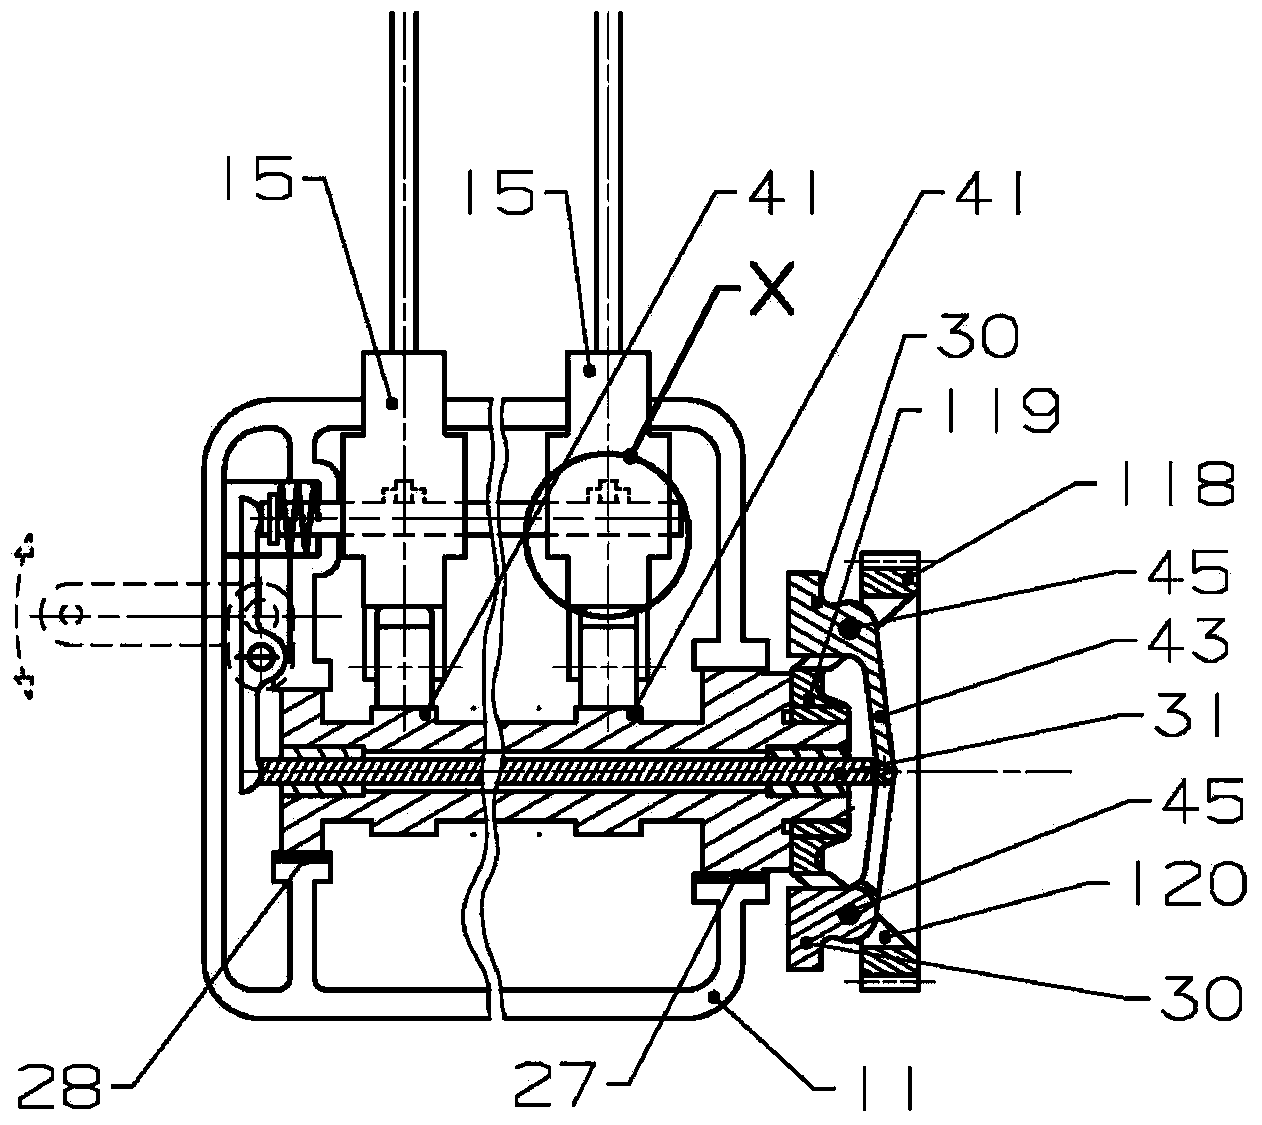 Oil injection pump with centrifugal regulator